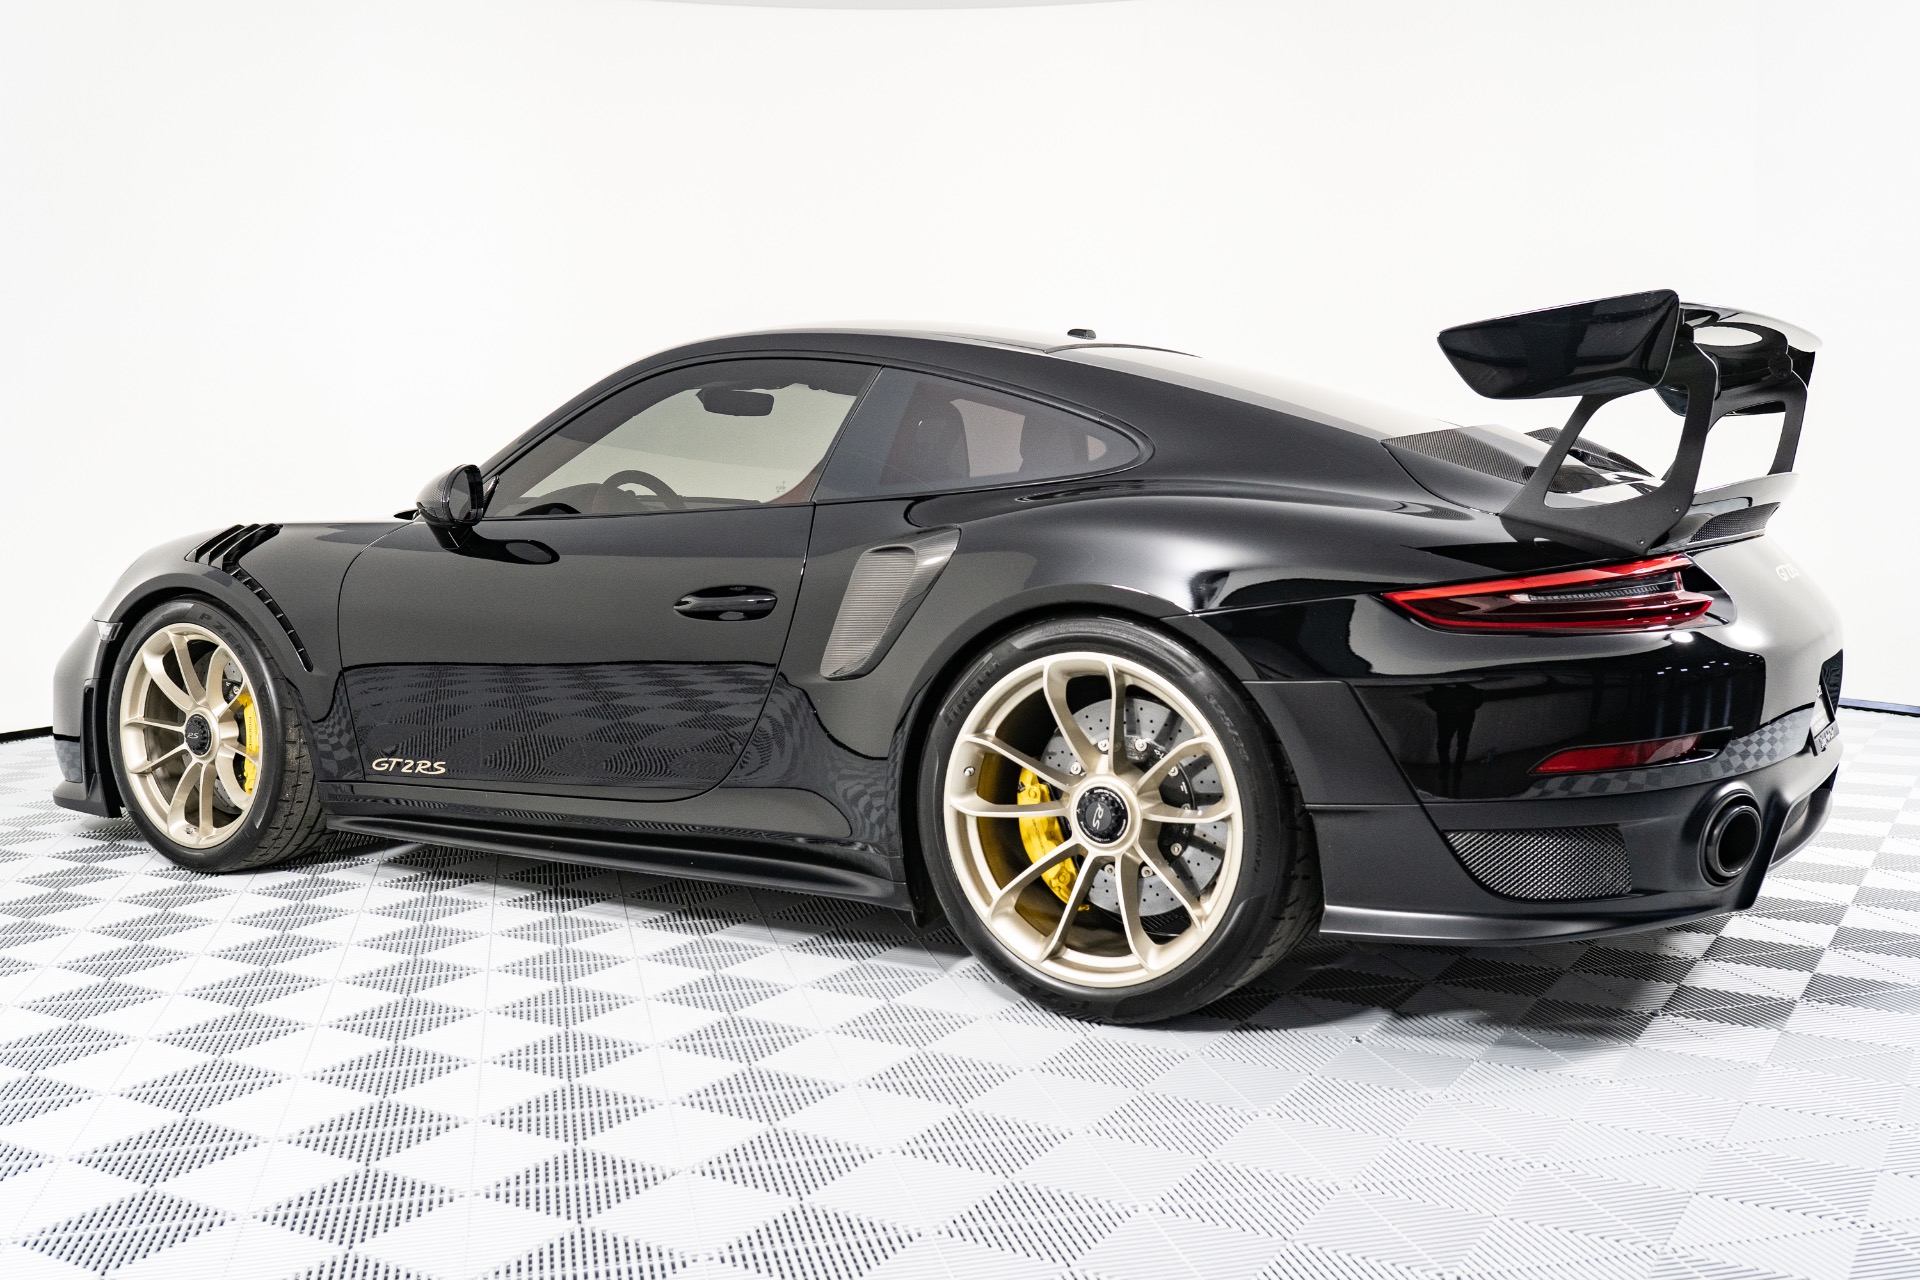 Used-2019-Porsche-911-GT2-RS-FULL-PPF-8k-Miles-Weissach-Package-CPO-Warranty